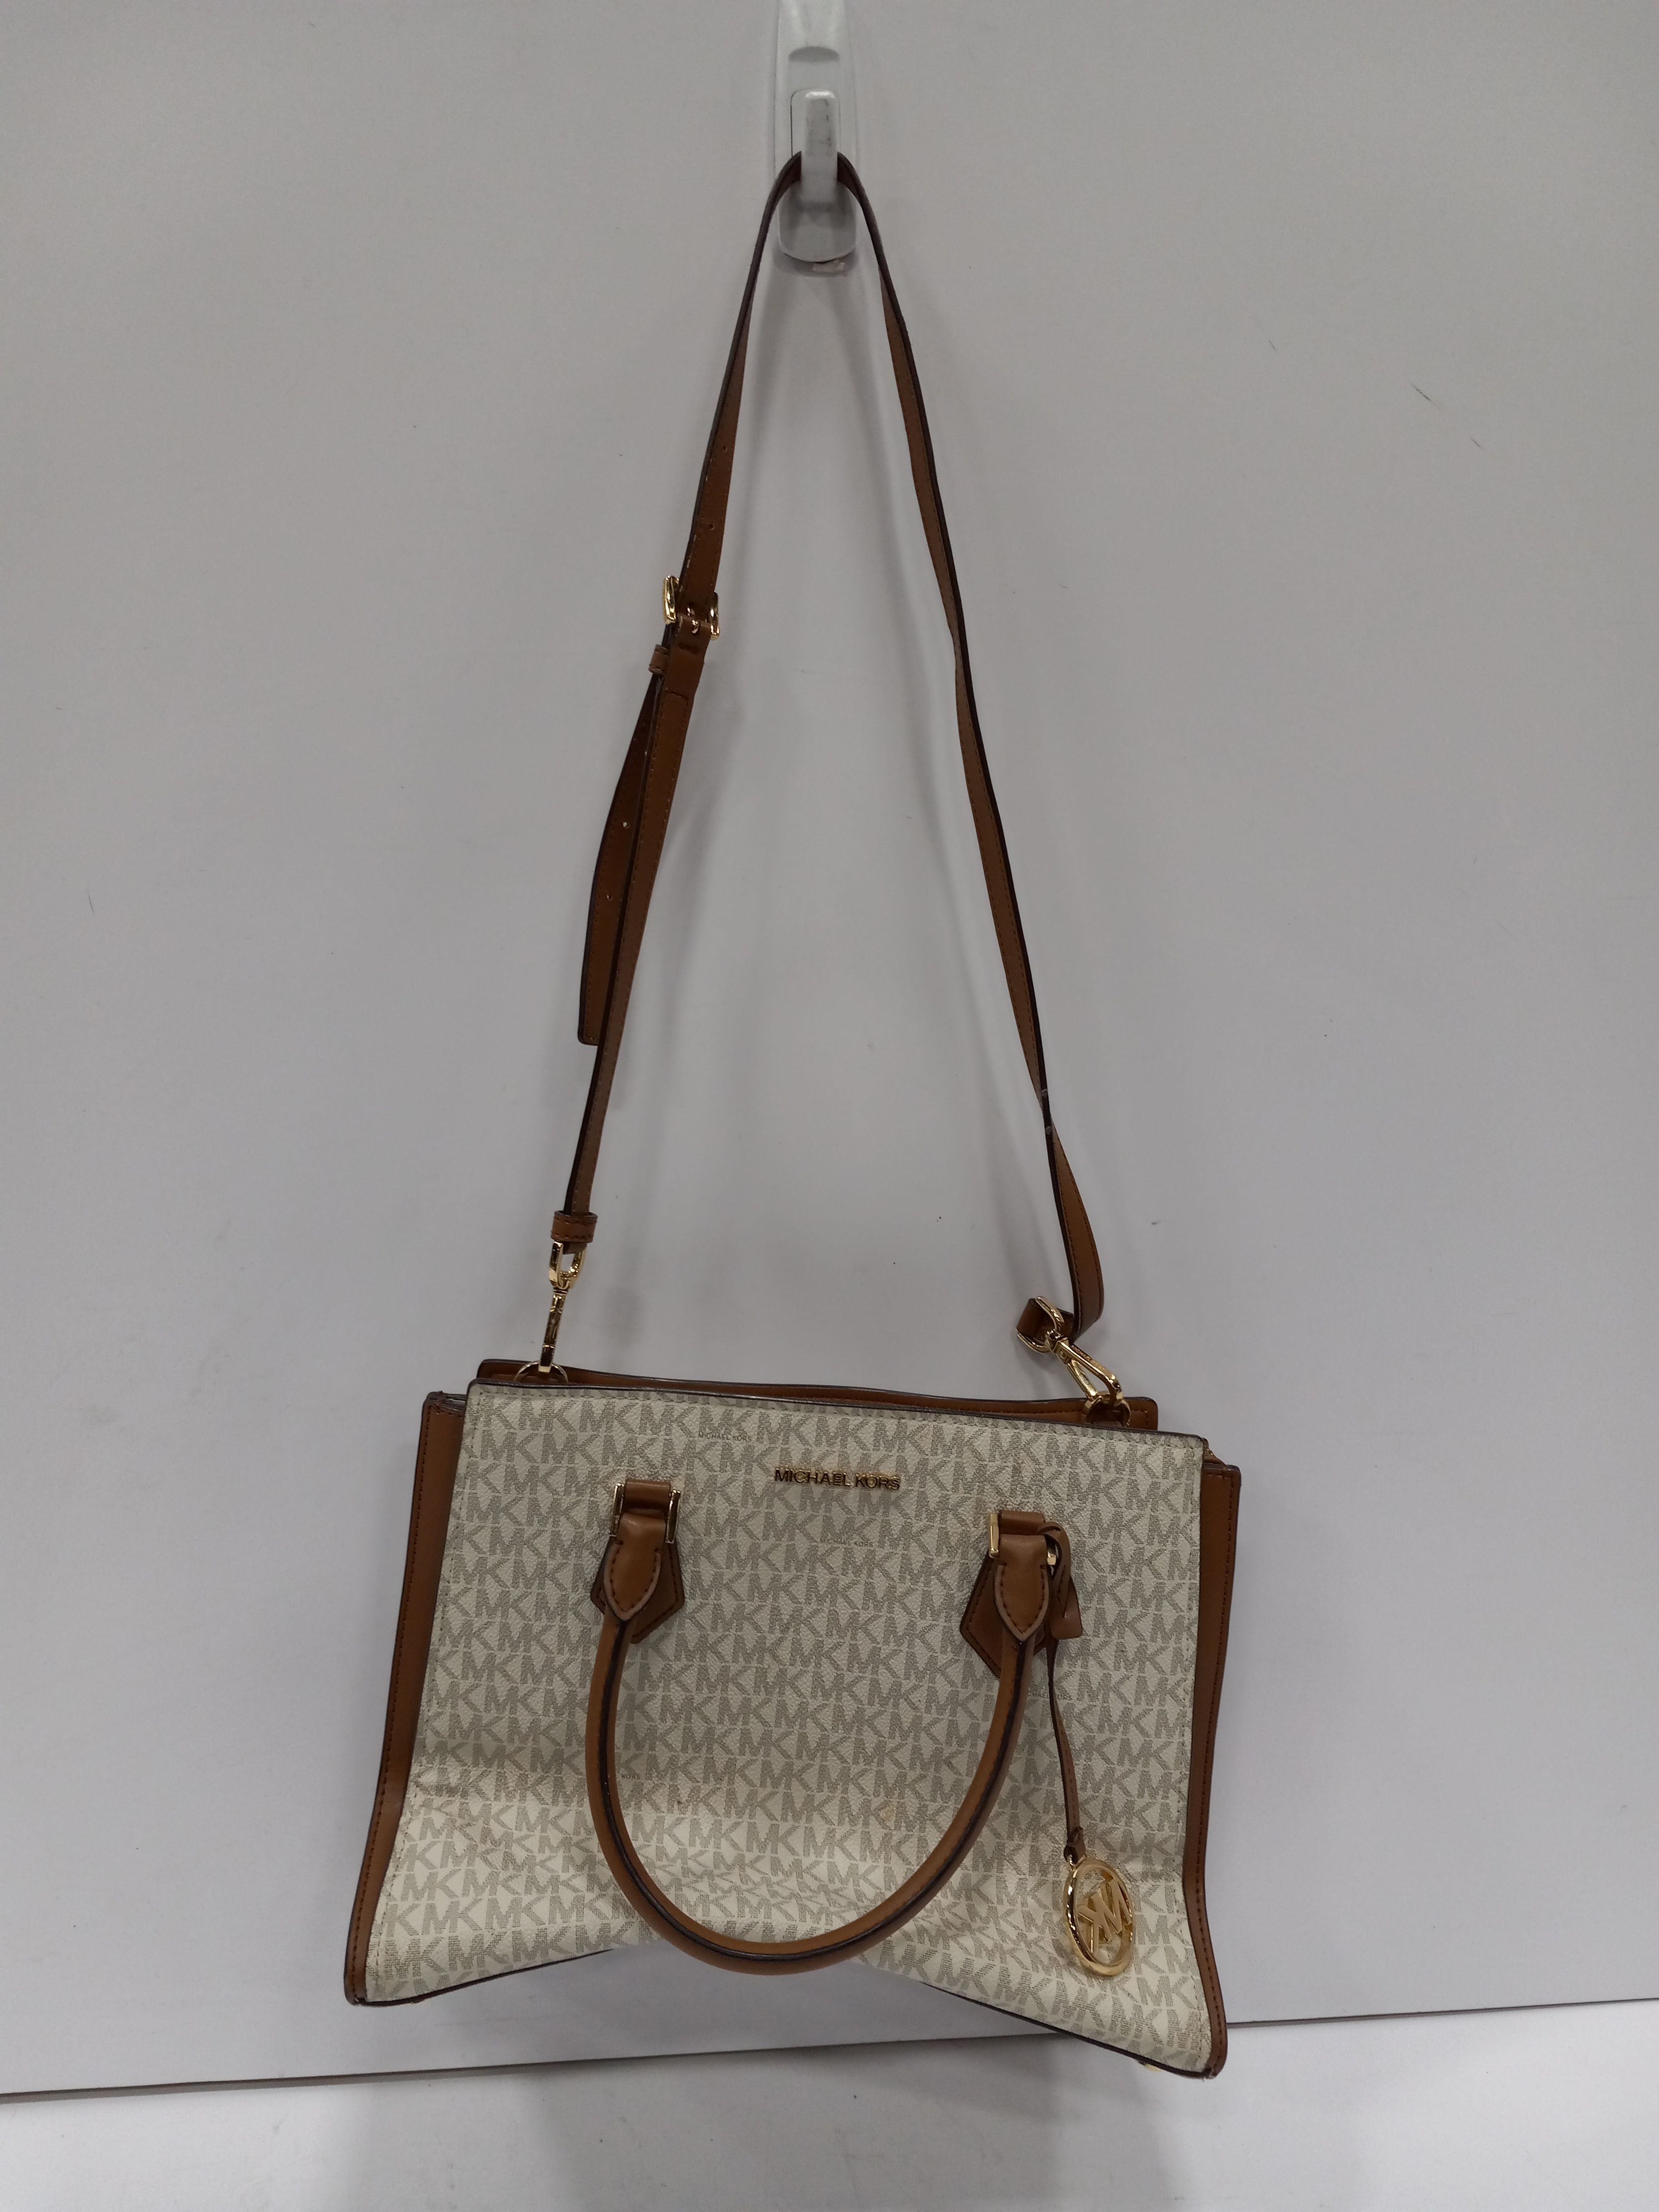 Buy the Michael Kors White & Brown Leather Tote Purse | GoodwillFinds